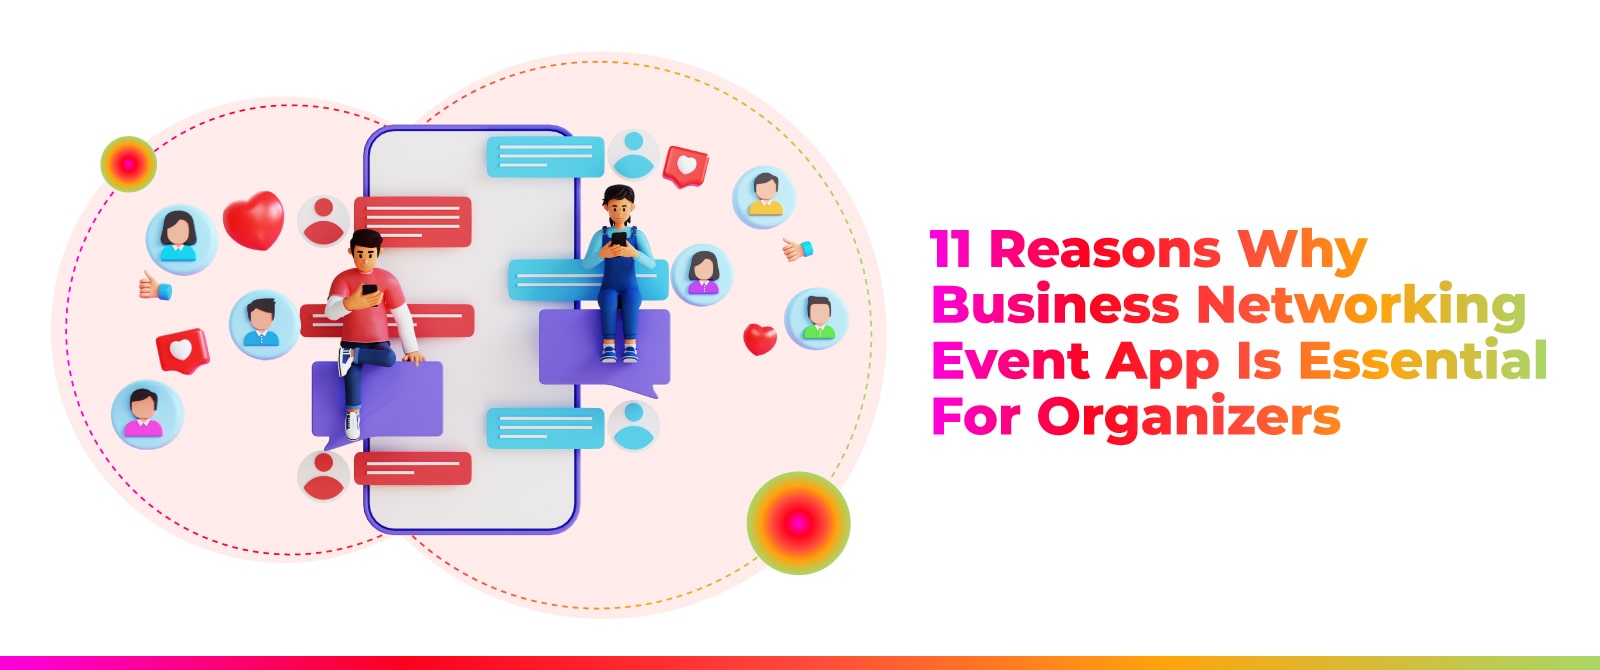 11 Reasons Why Business Networking Event App Is Essential For Organizers